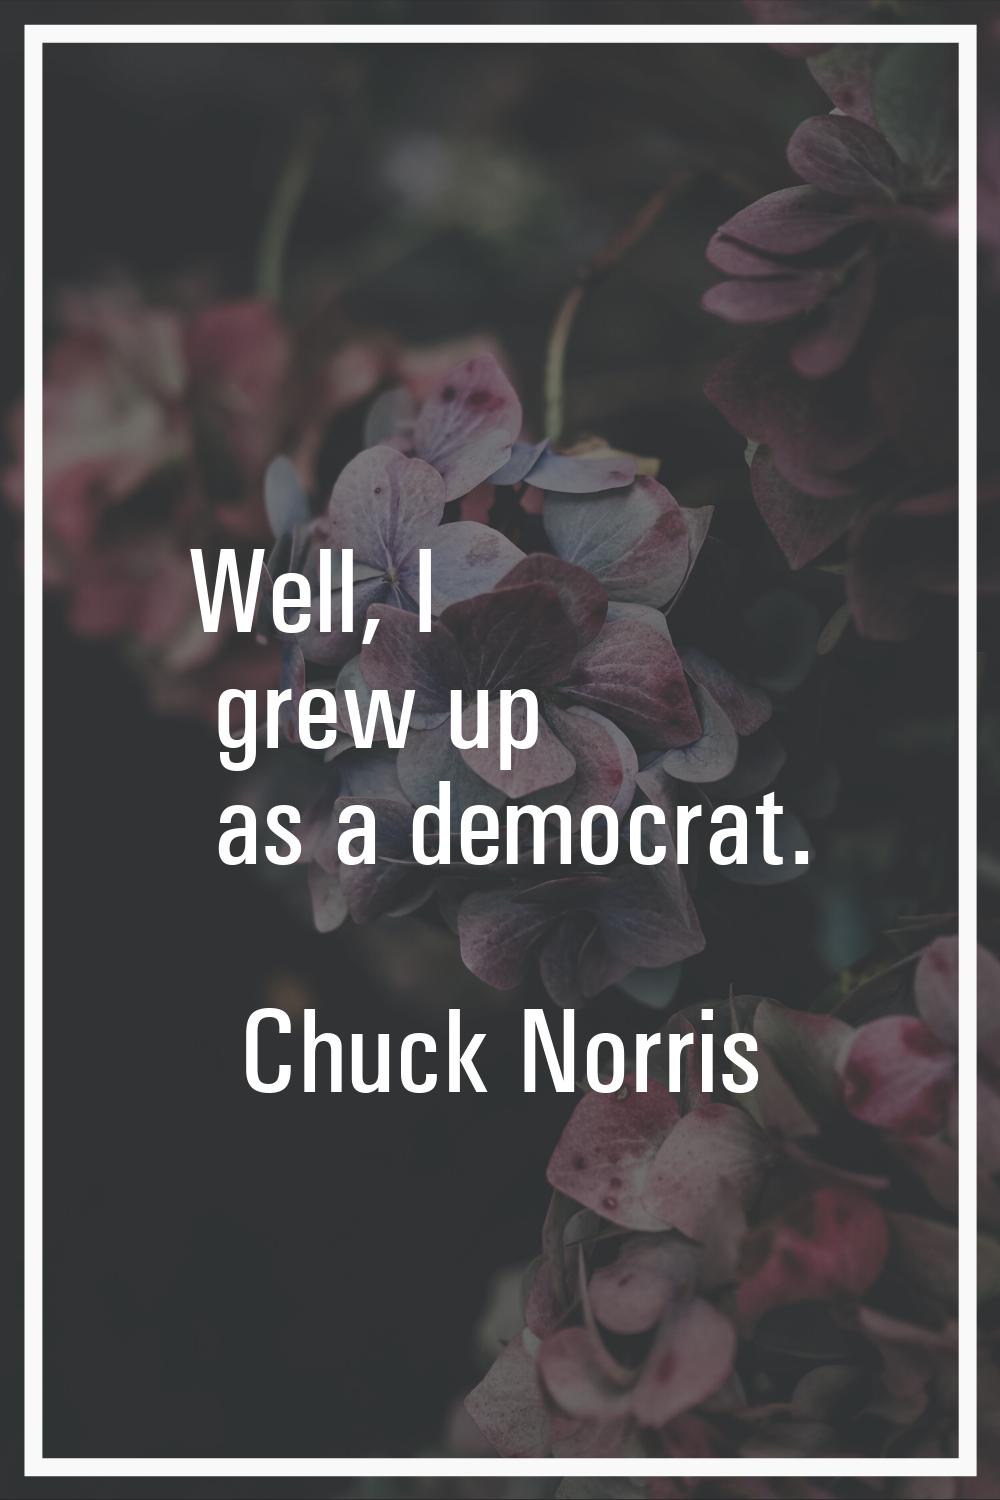 Well, I grew up as a democrat.